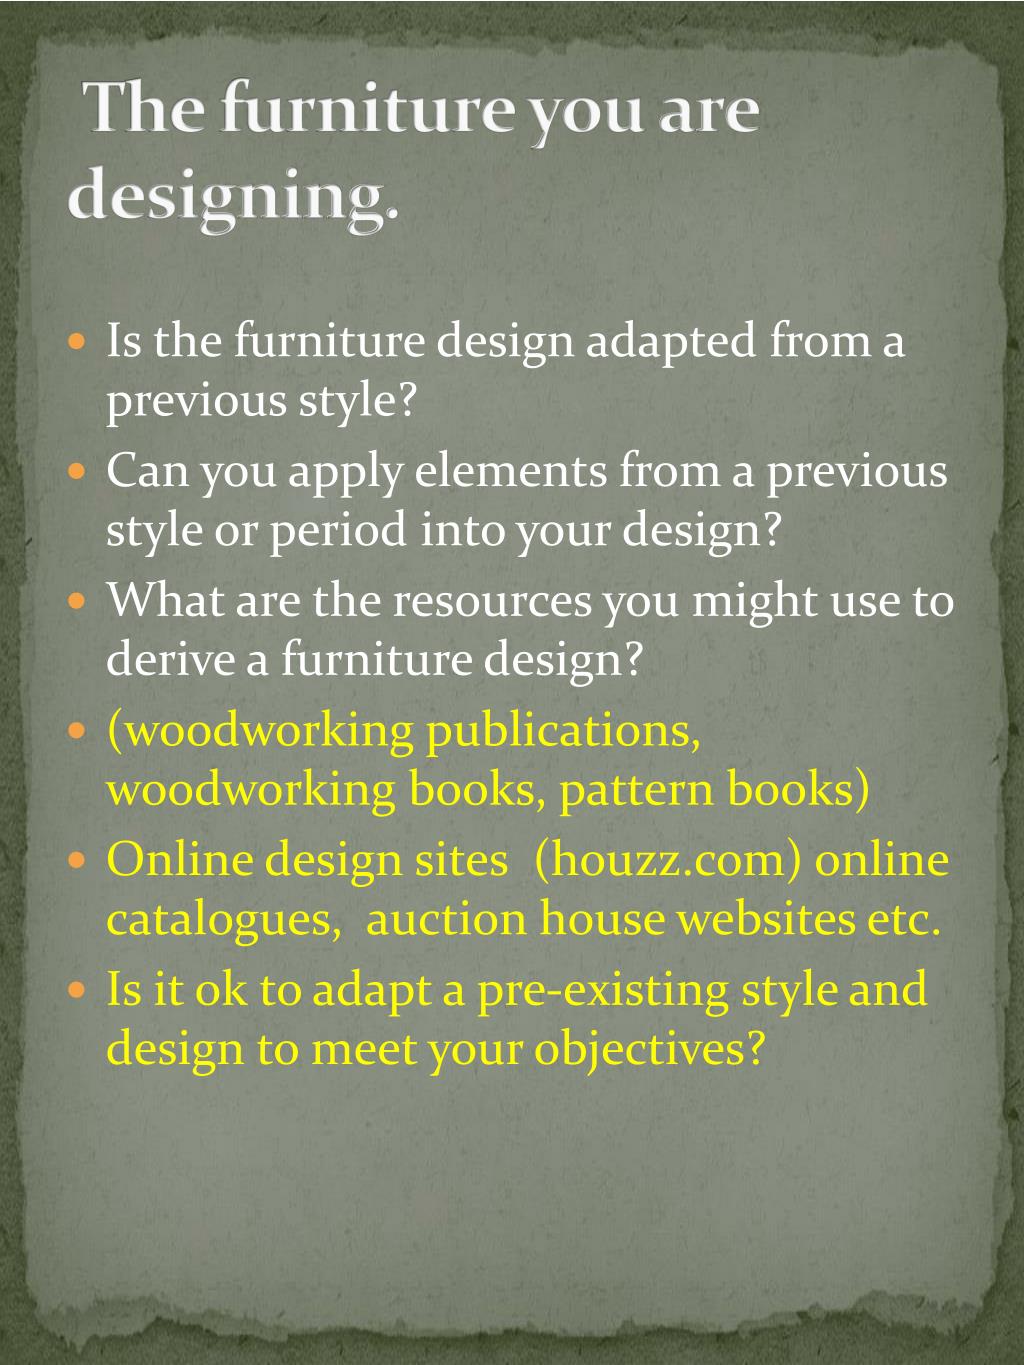 PPT - Principles of Furniture & Joinery Design PowerPoint Presentation ...